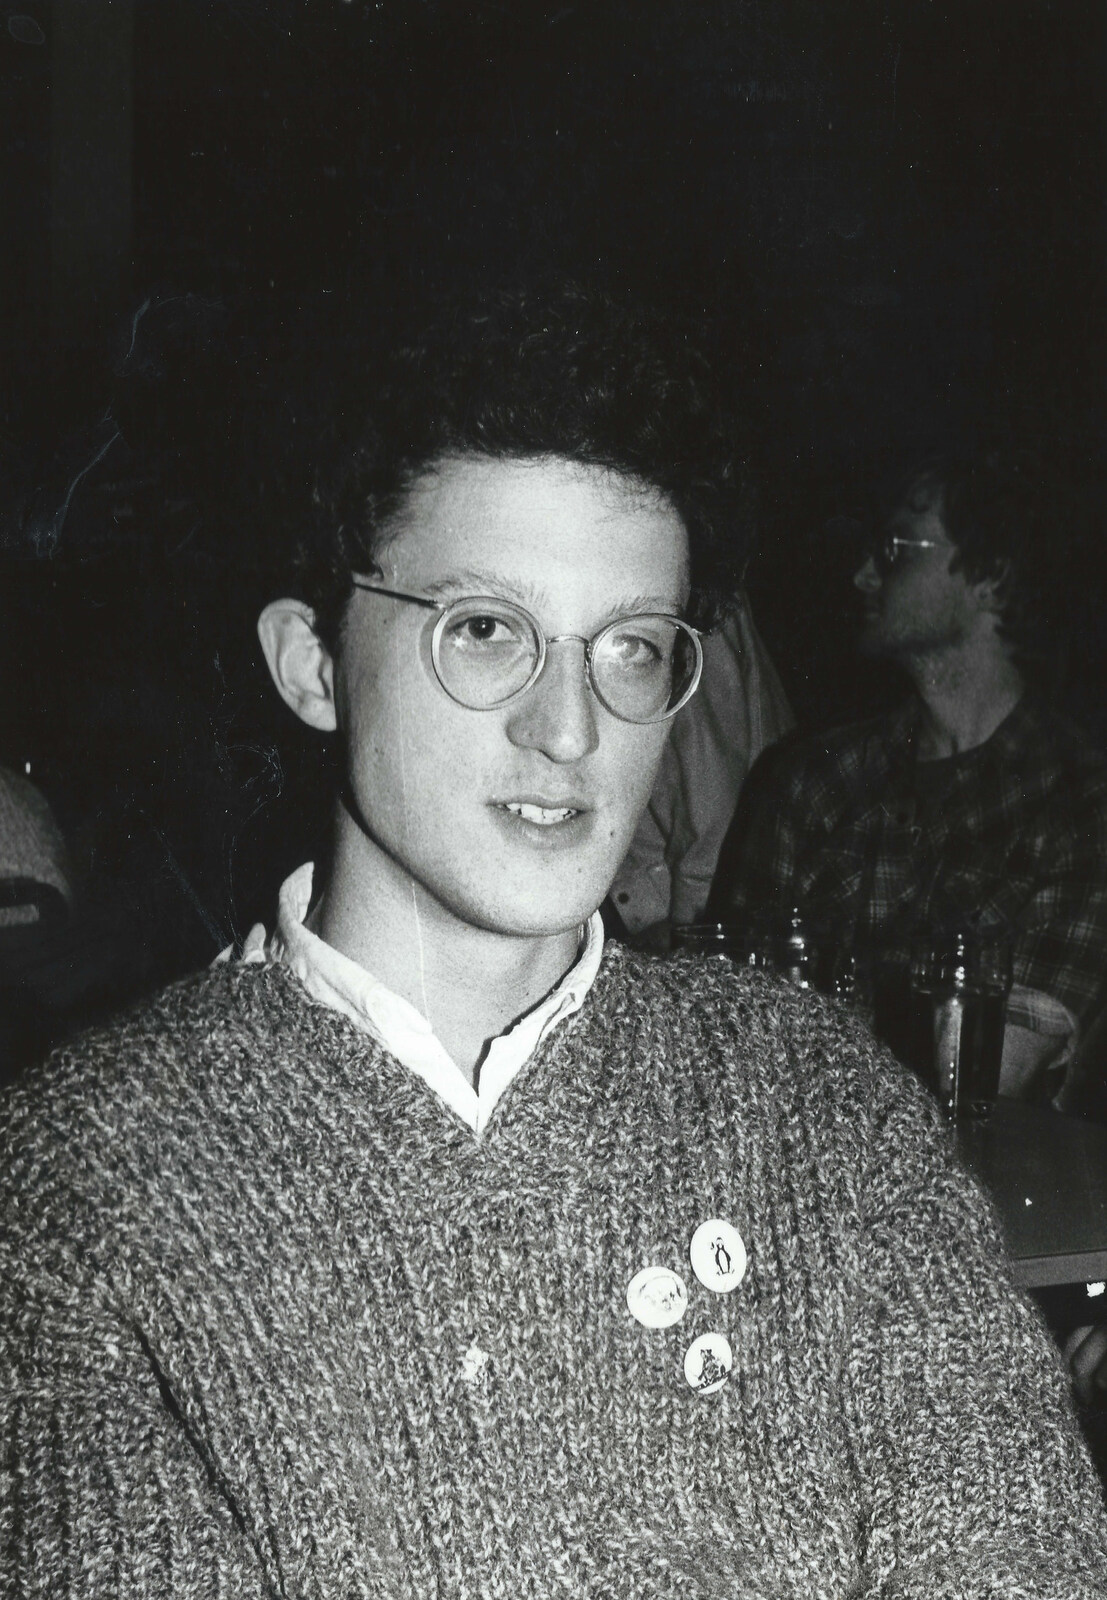 Christos Zarakovitis in the Students' Union from Uni: The First Year in Black and White, Plymouth Polytechnic, Devon - 8th April 1986